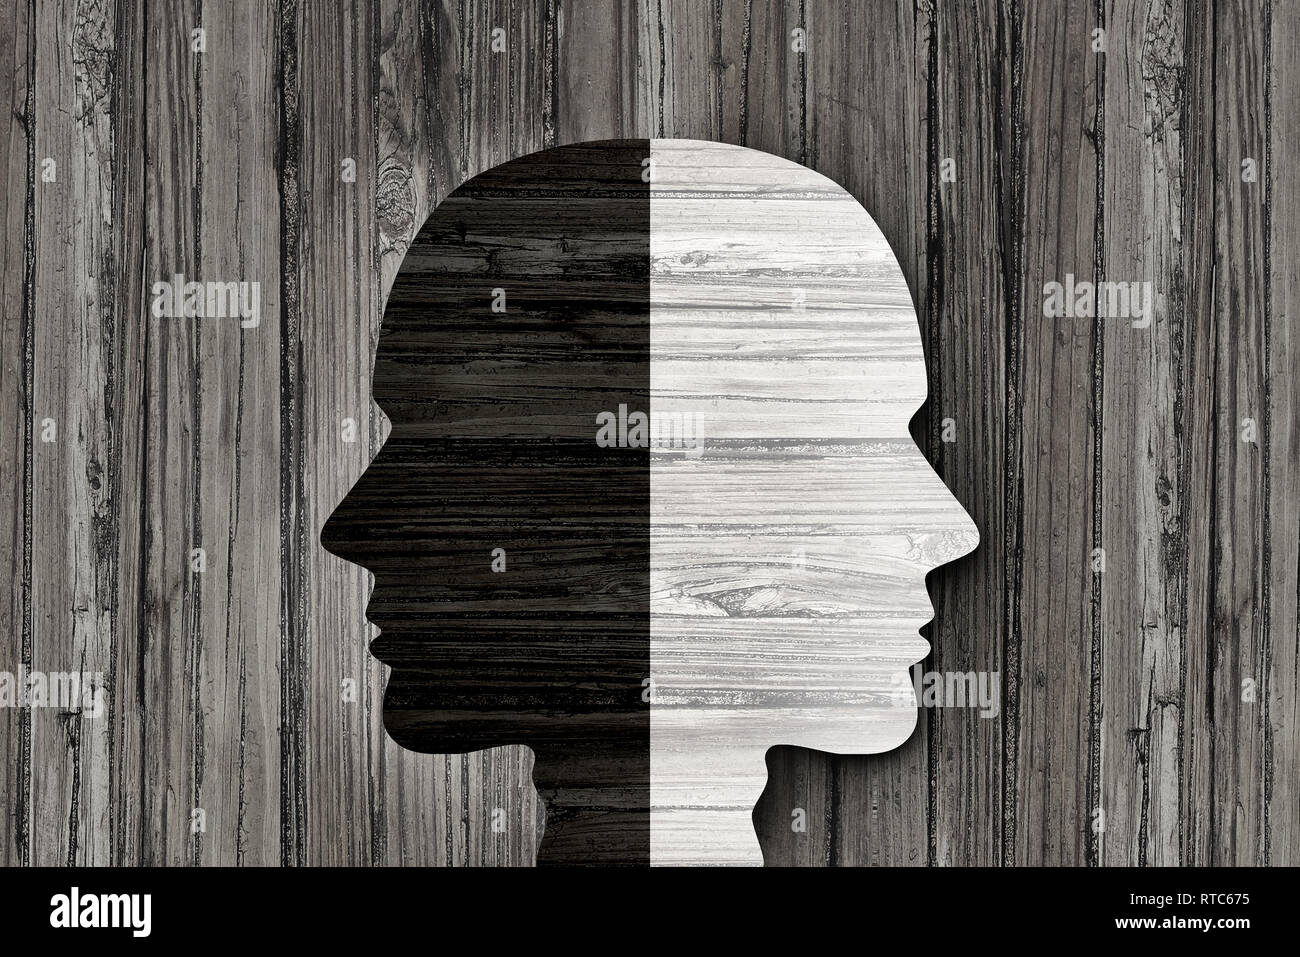 Behavior mental disorder and schizophrenia or split personality illness and mind health psychiatric or psychological disease concept. Stock Photo